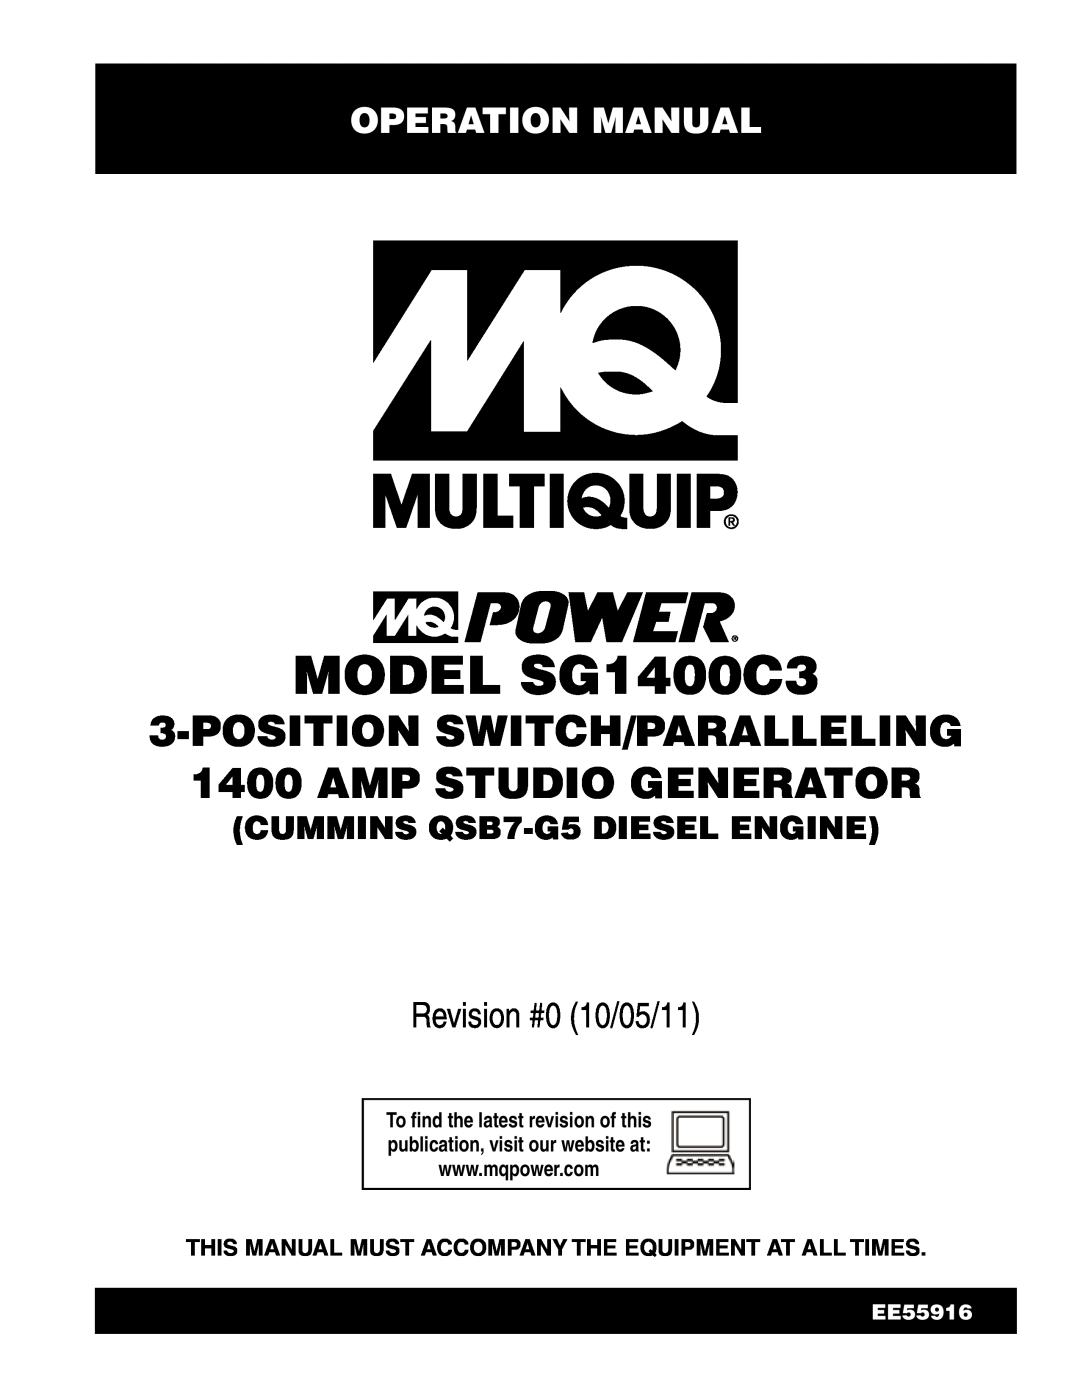 Multiquip SG1400C3 operation manual Operation Manual, This Manual Must Accompany The Equipment At All Times, EE55916 